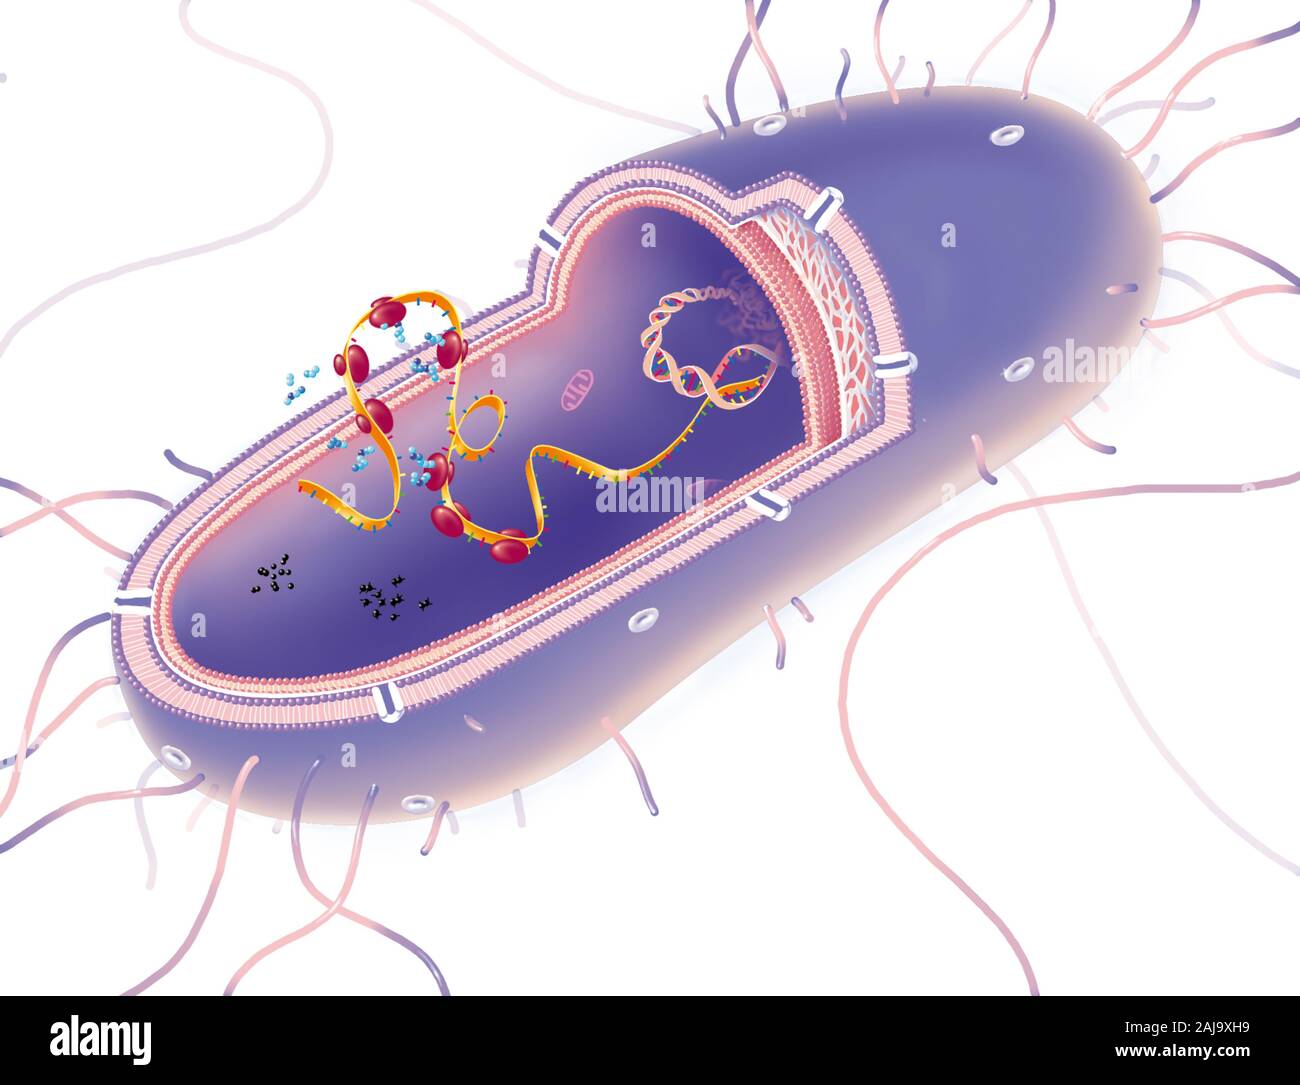 Structure of a gram negative bacteria. The bacterium is partially cut to show its structure: wall traversed by porins, peptidoglycan and membrane. At the heart of the bacteria, DNA in transcription with a long strand of mRNA, the ribosomes producing proteins. on the left, PABA is involved in the transformation of folic acid into folinic acid. Stock Photo